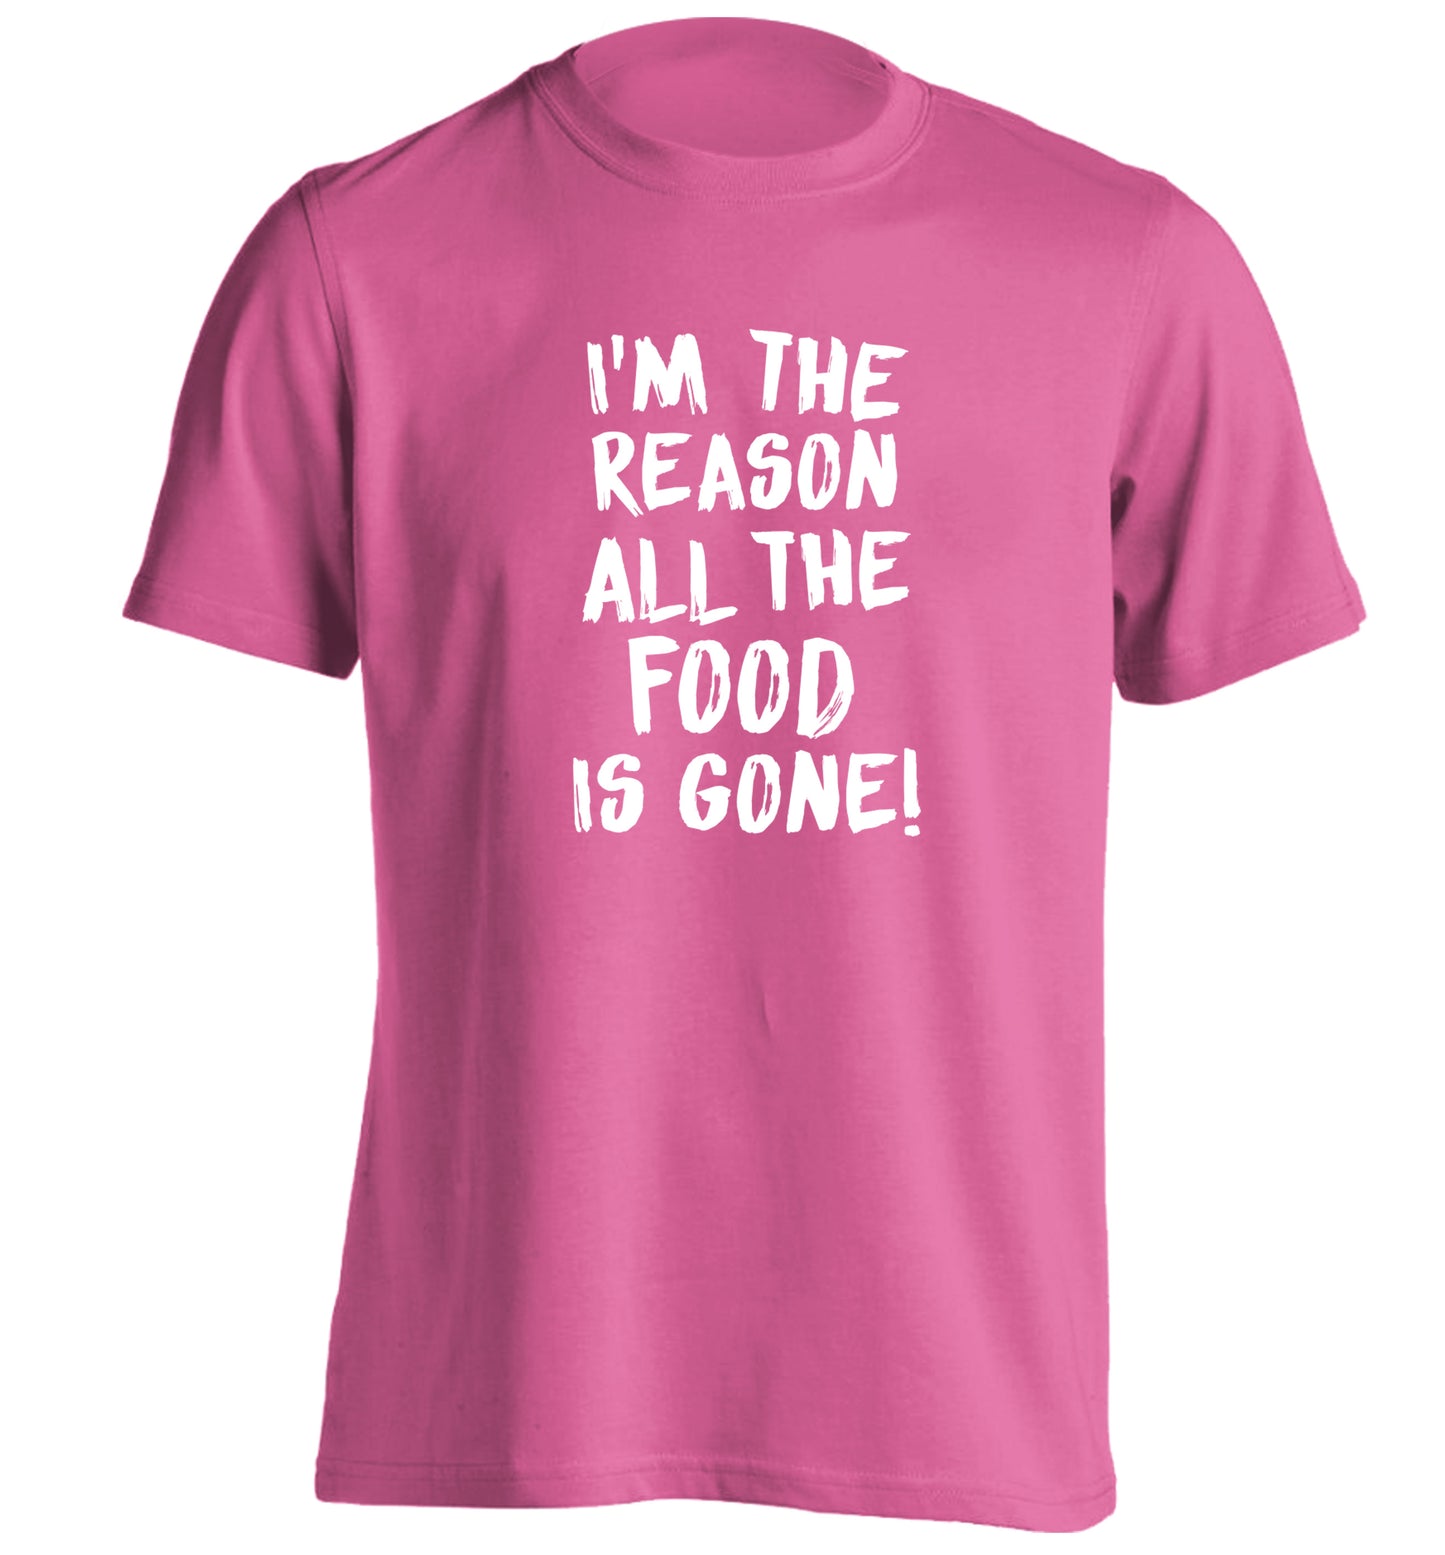 I'm the reason why all the food is gone adults unisex pink Tshirt 2XL